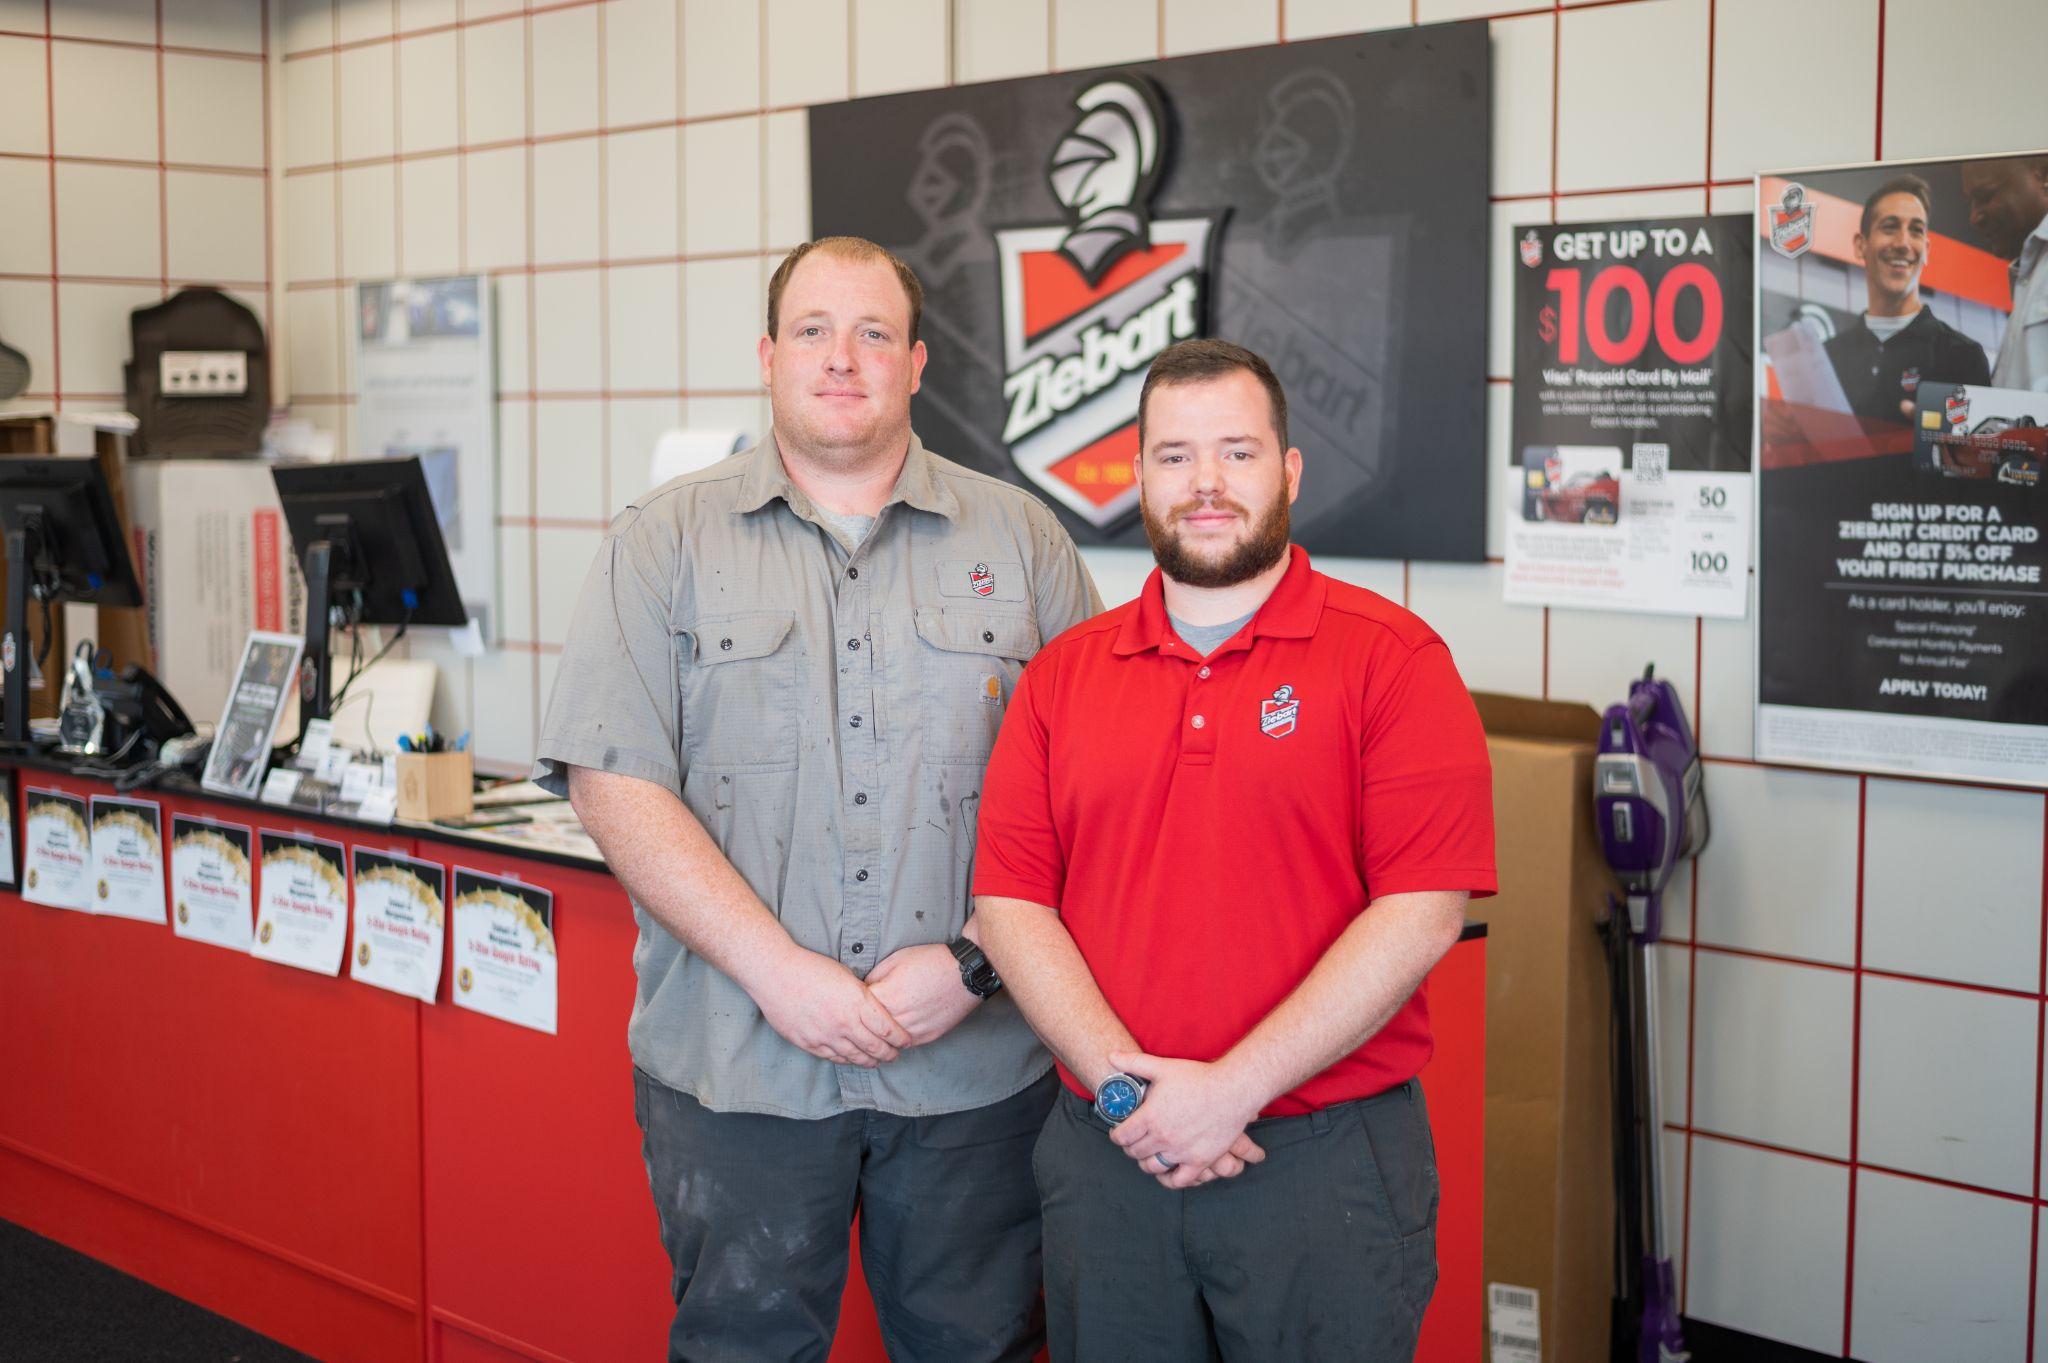 Morgantown Ziebart: Twin Brothers’ Vision to Build Good Business